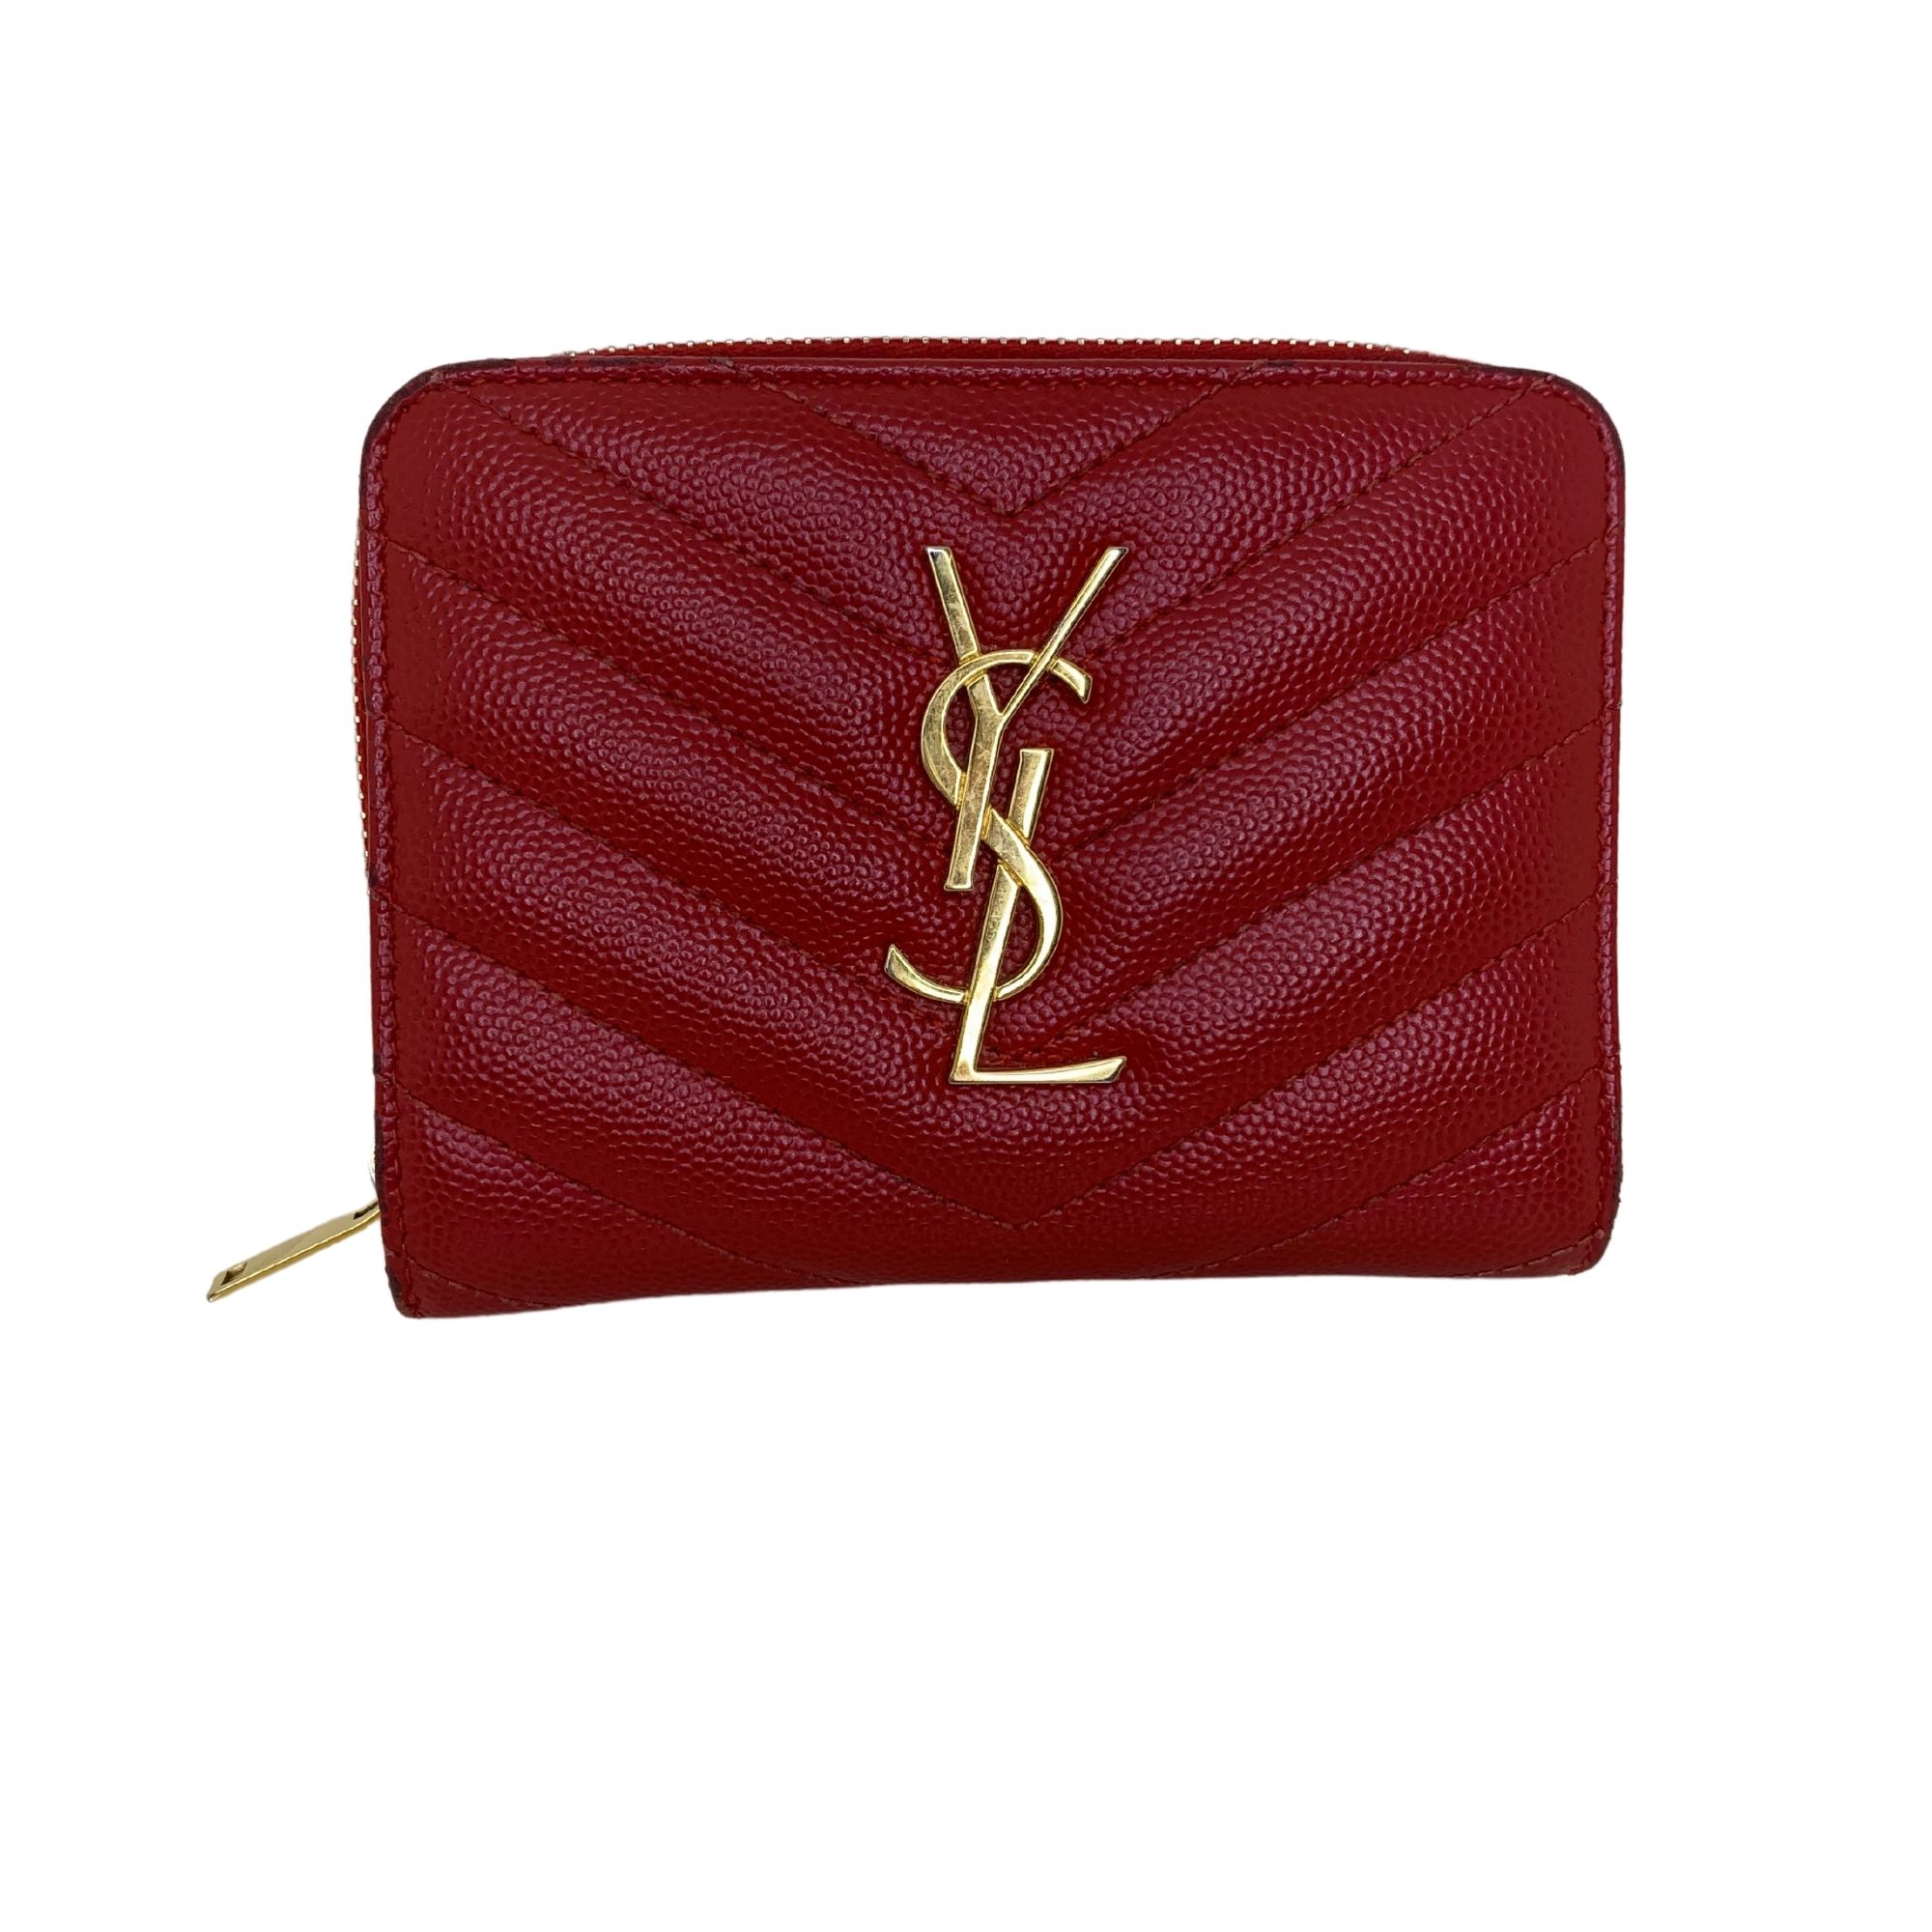 Auth SAINT LAURENT Leather Compact Wallet Bifold Wallet GUE414661 Red  (181416